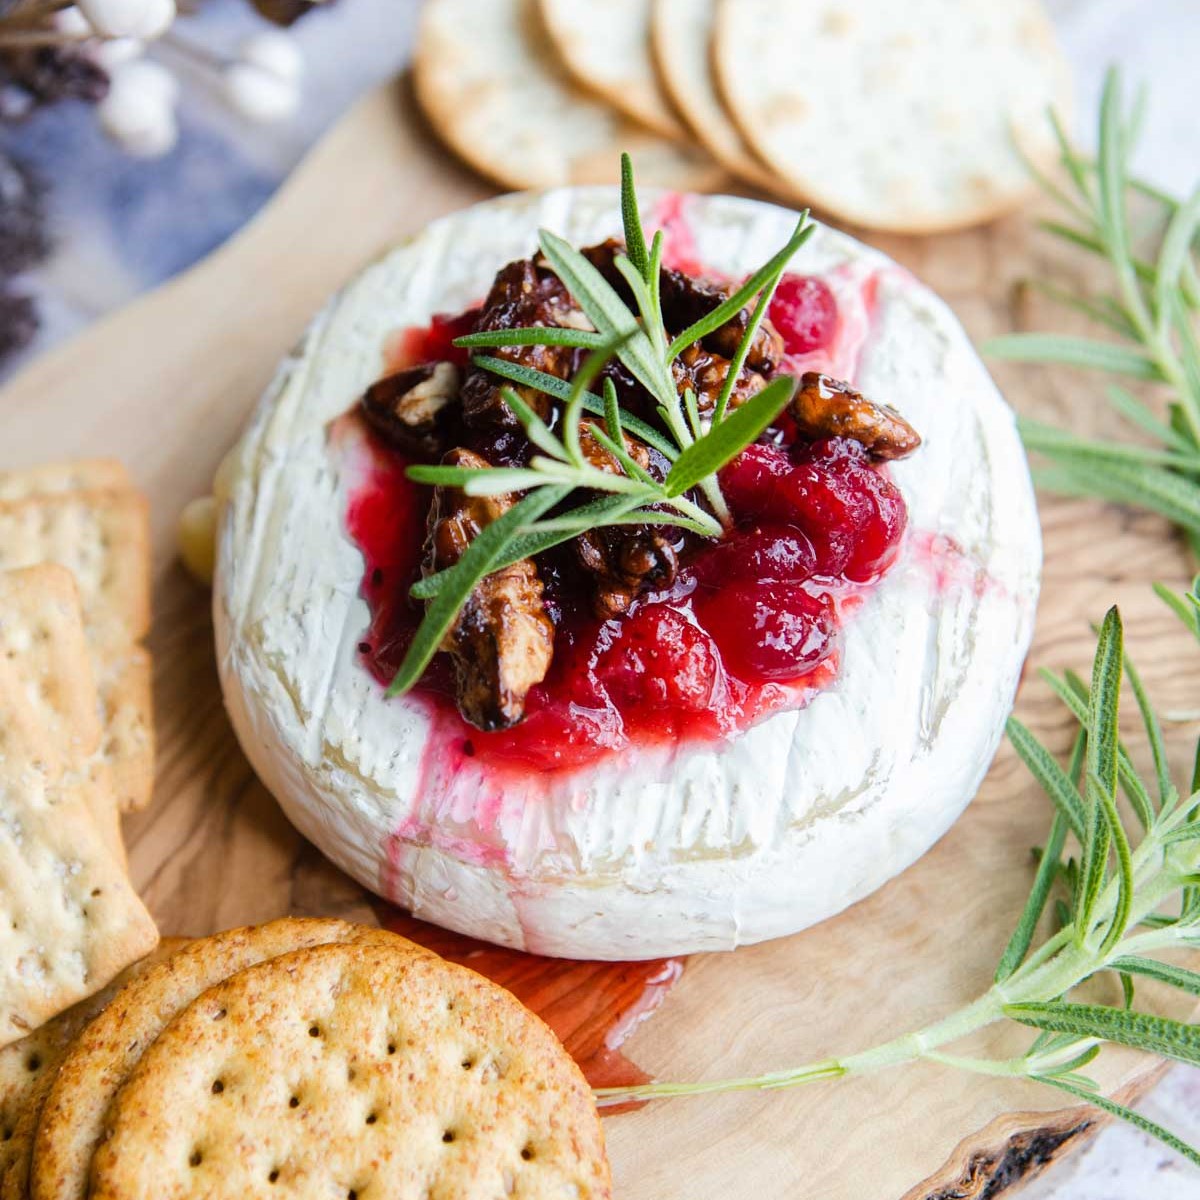 Baked Brie Recipe With Jam - Howe We Live